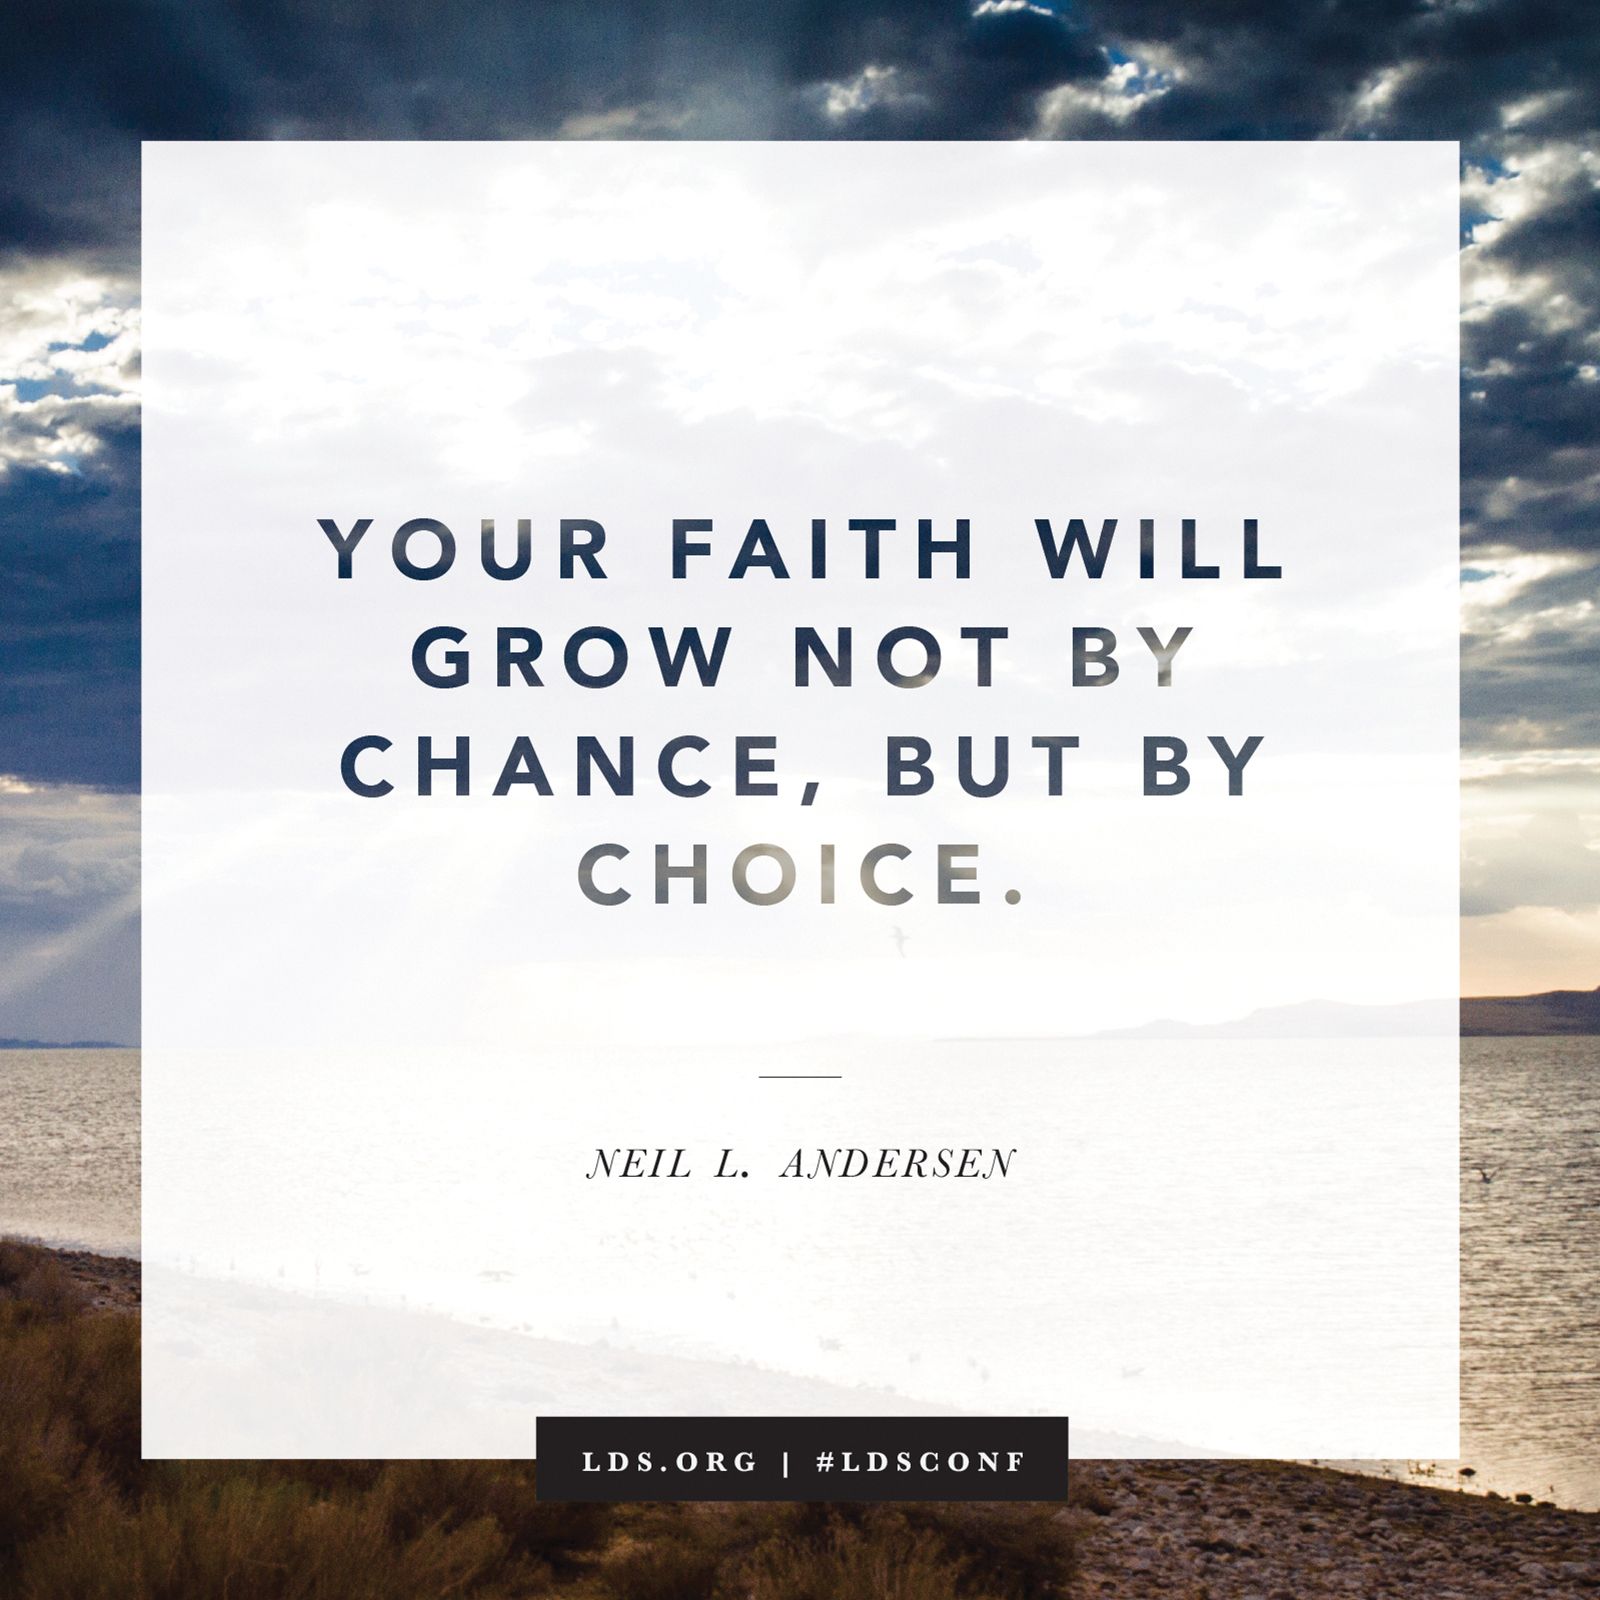 “Your faith will grow not by chance, but by choice.” —Elder Neil L. Andersen, “Faith Is Not by Chance, but by Choice”